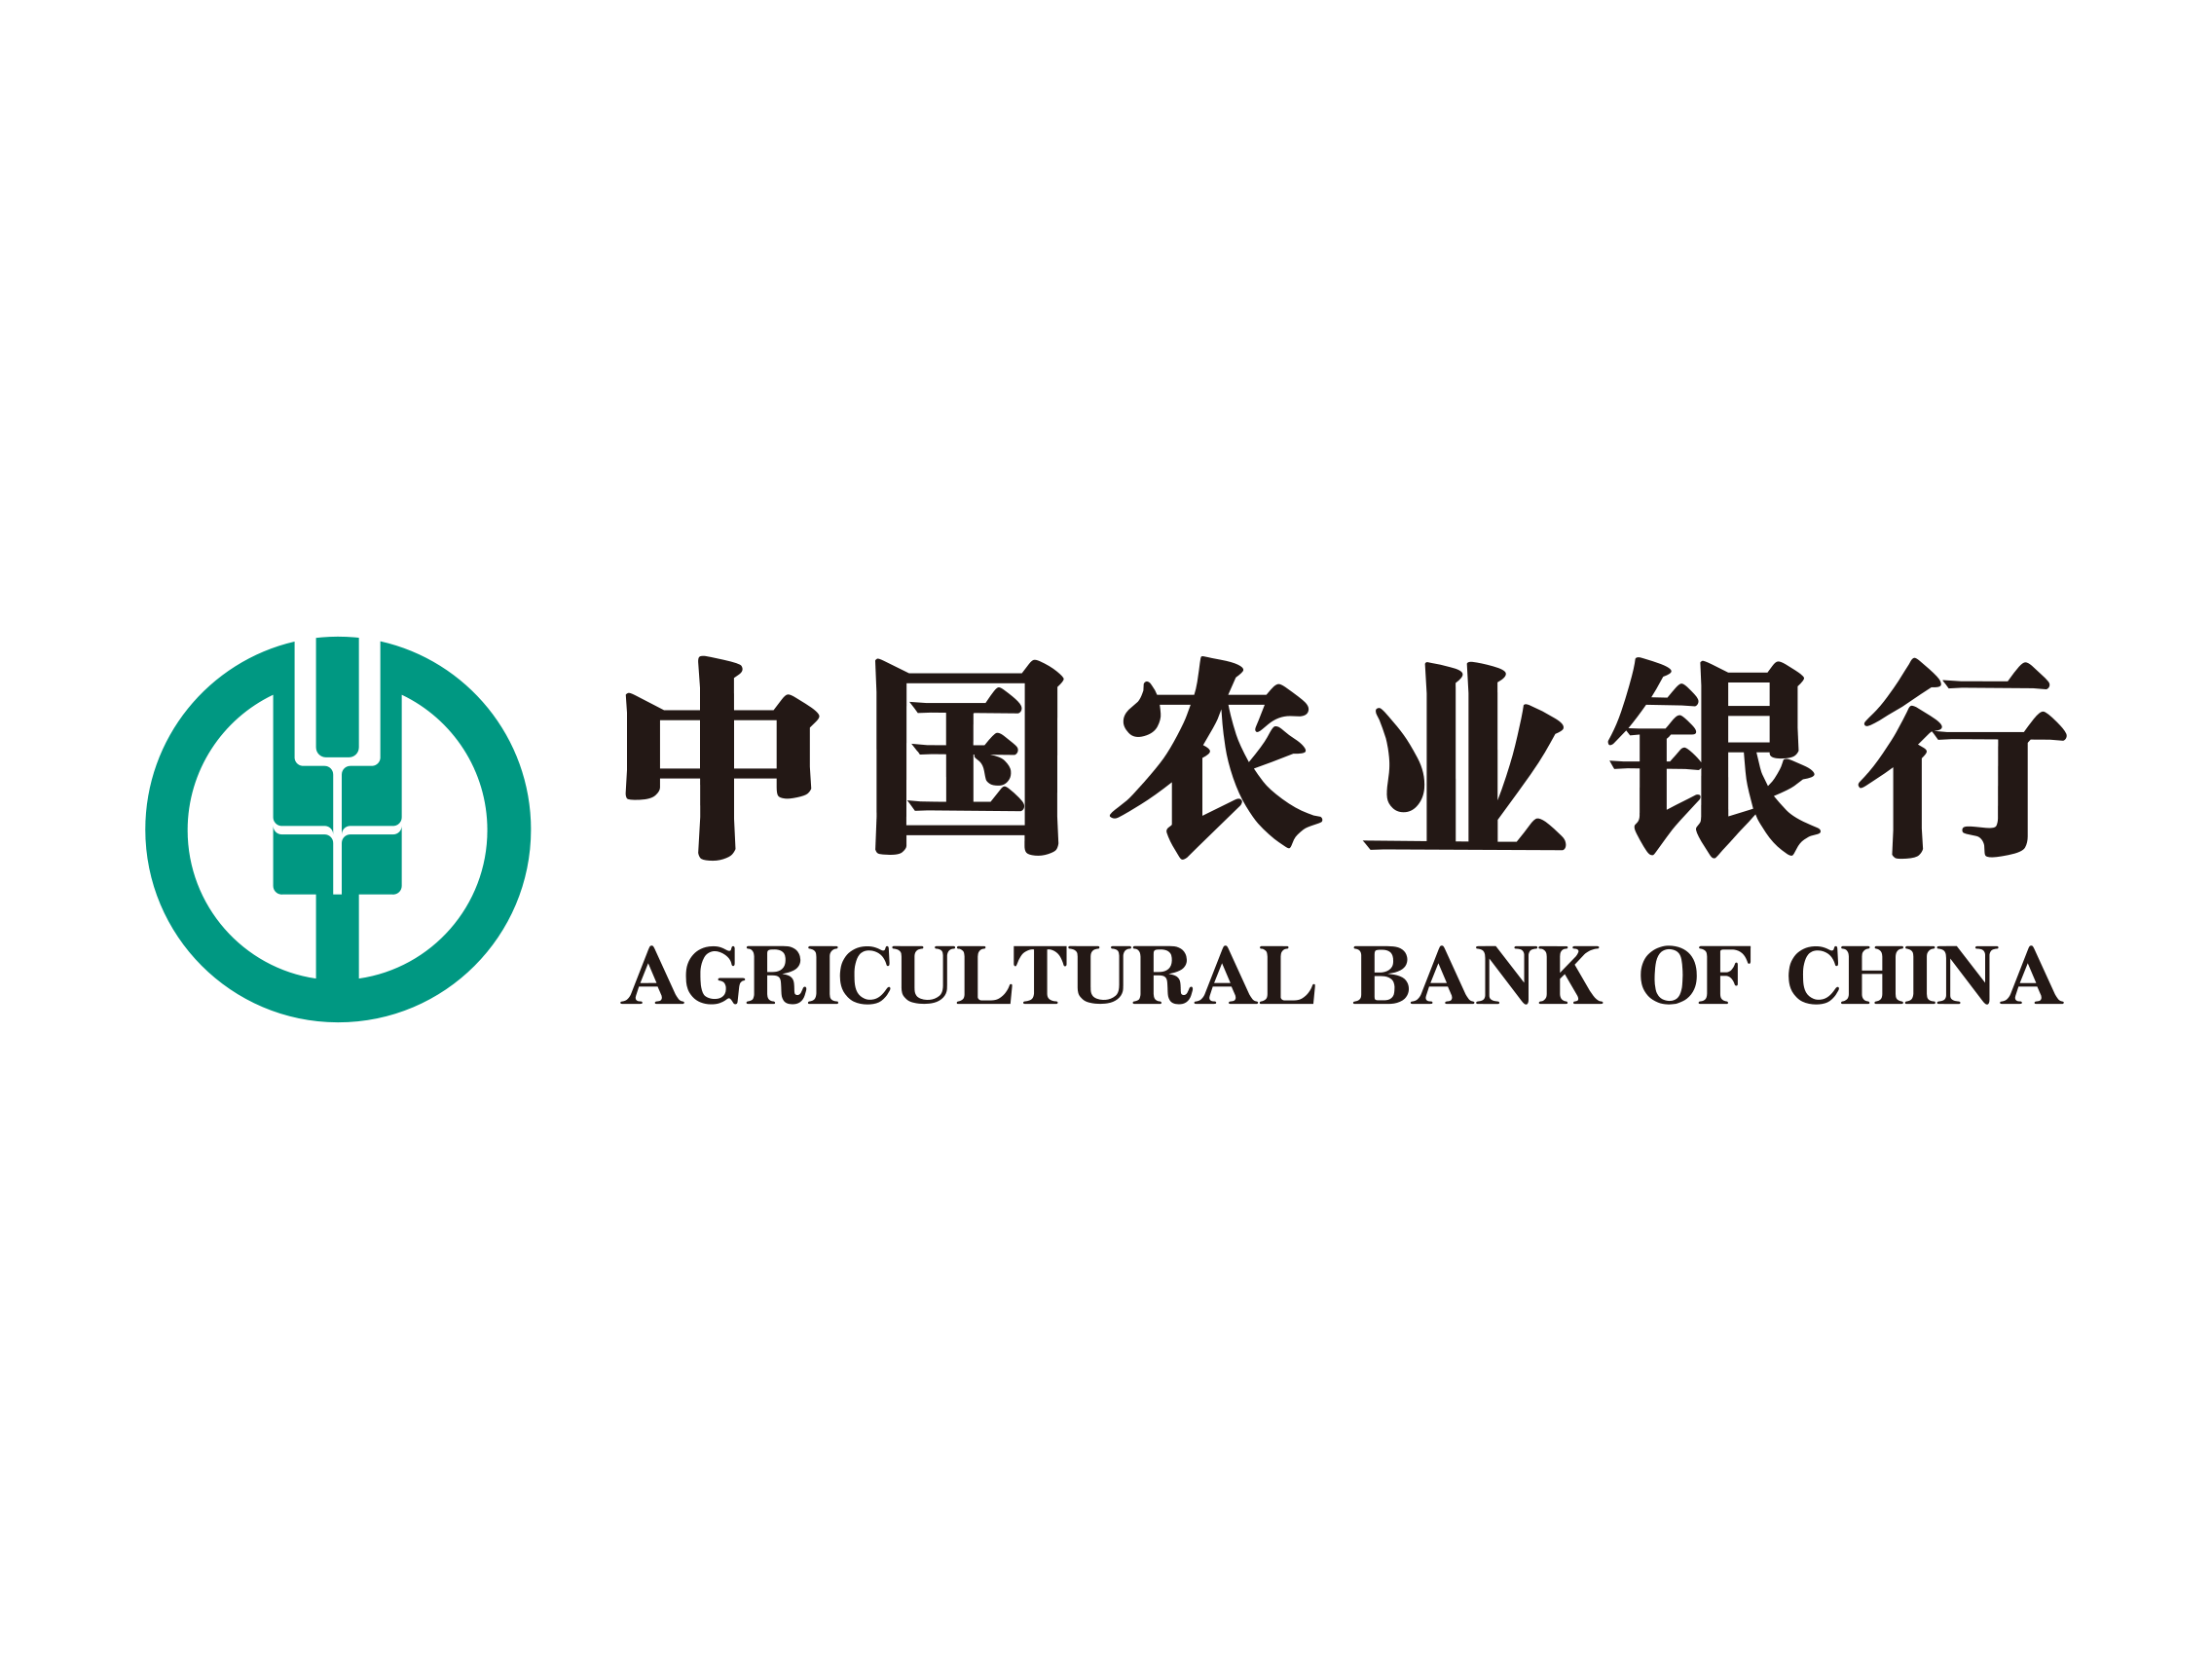 Agricultural Bank Of China (H